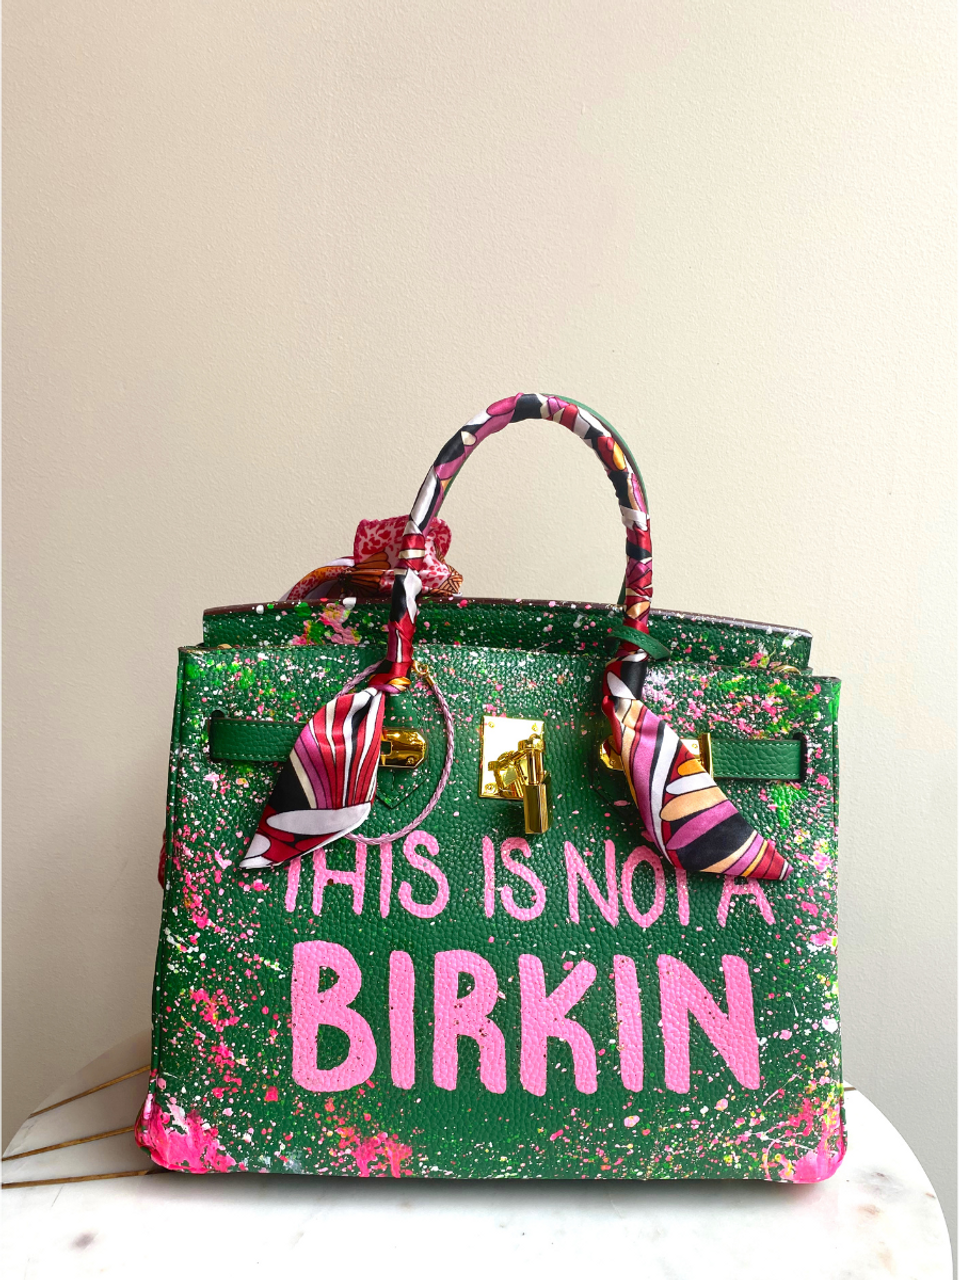 Nwt Anca Barbu Vergan Leather This Is Not A Birkin India